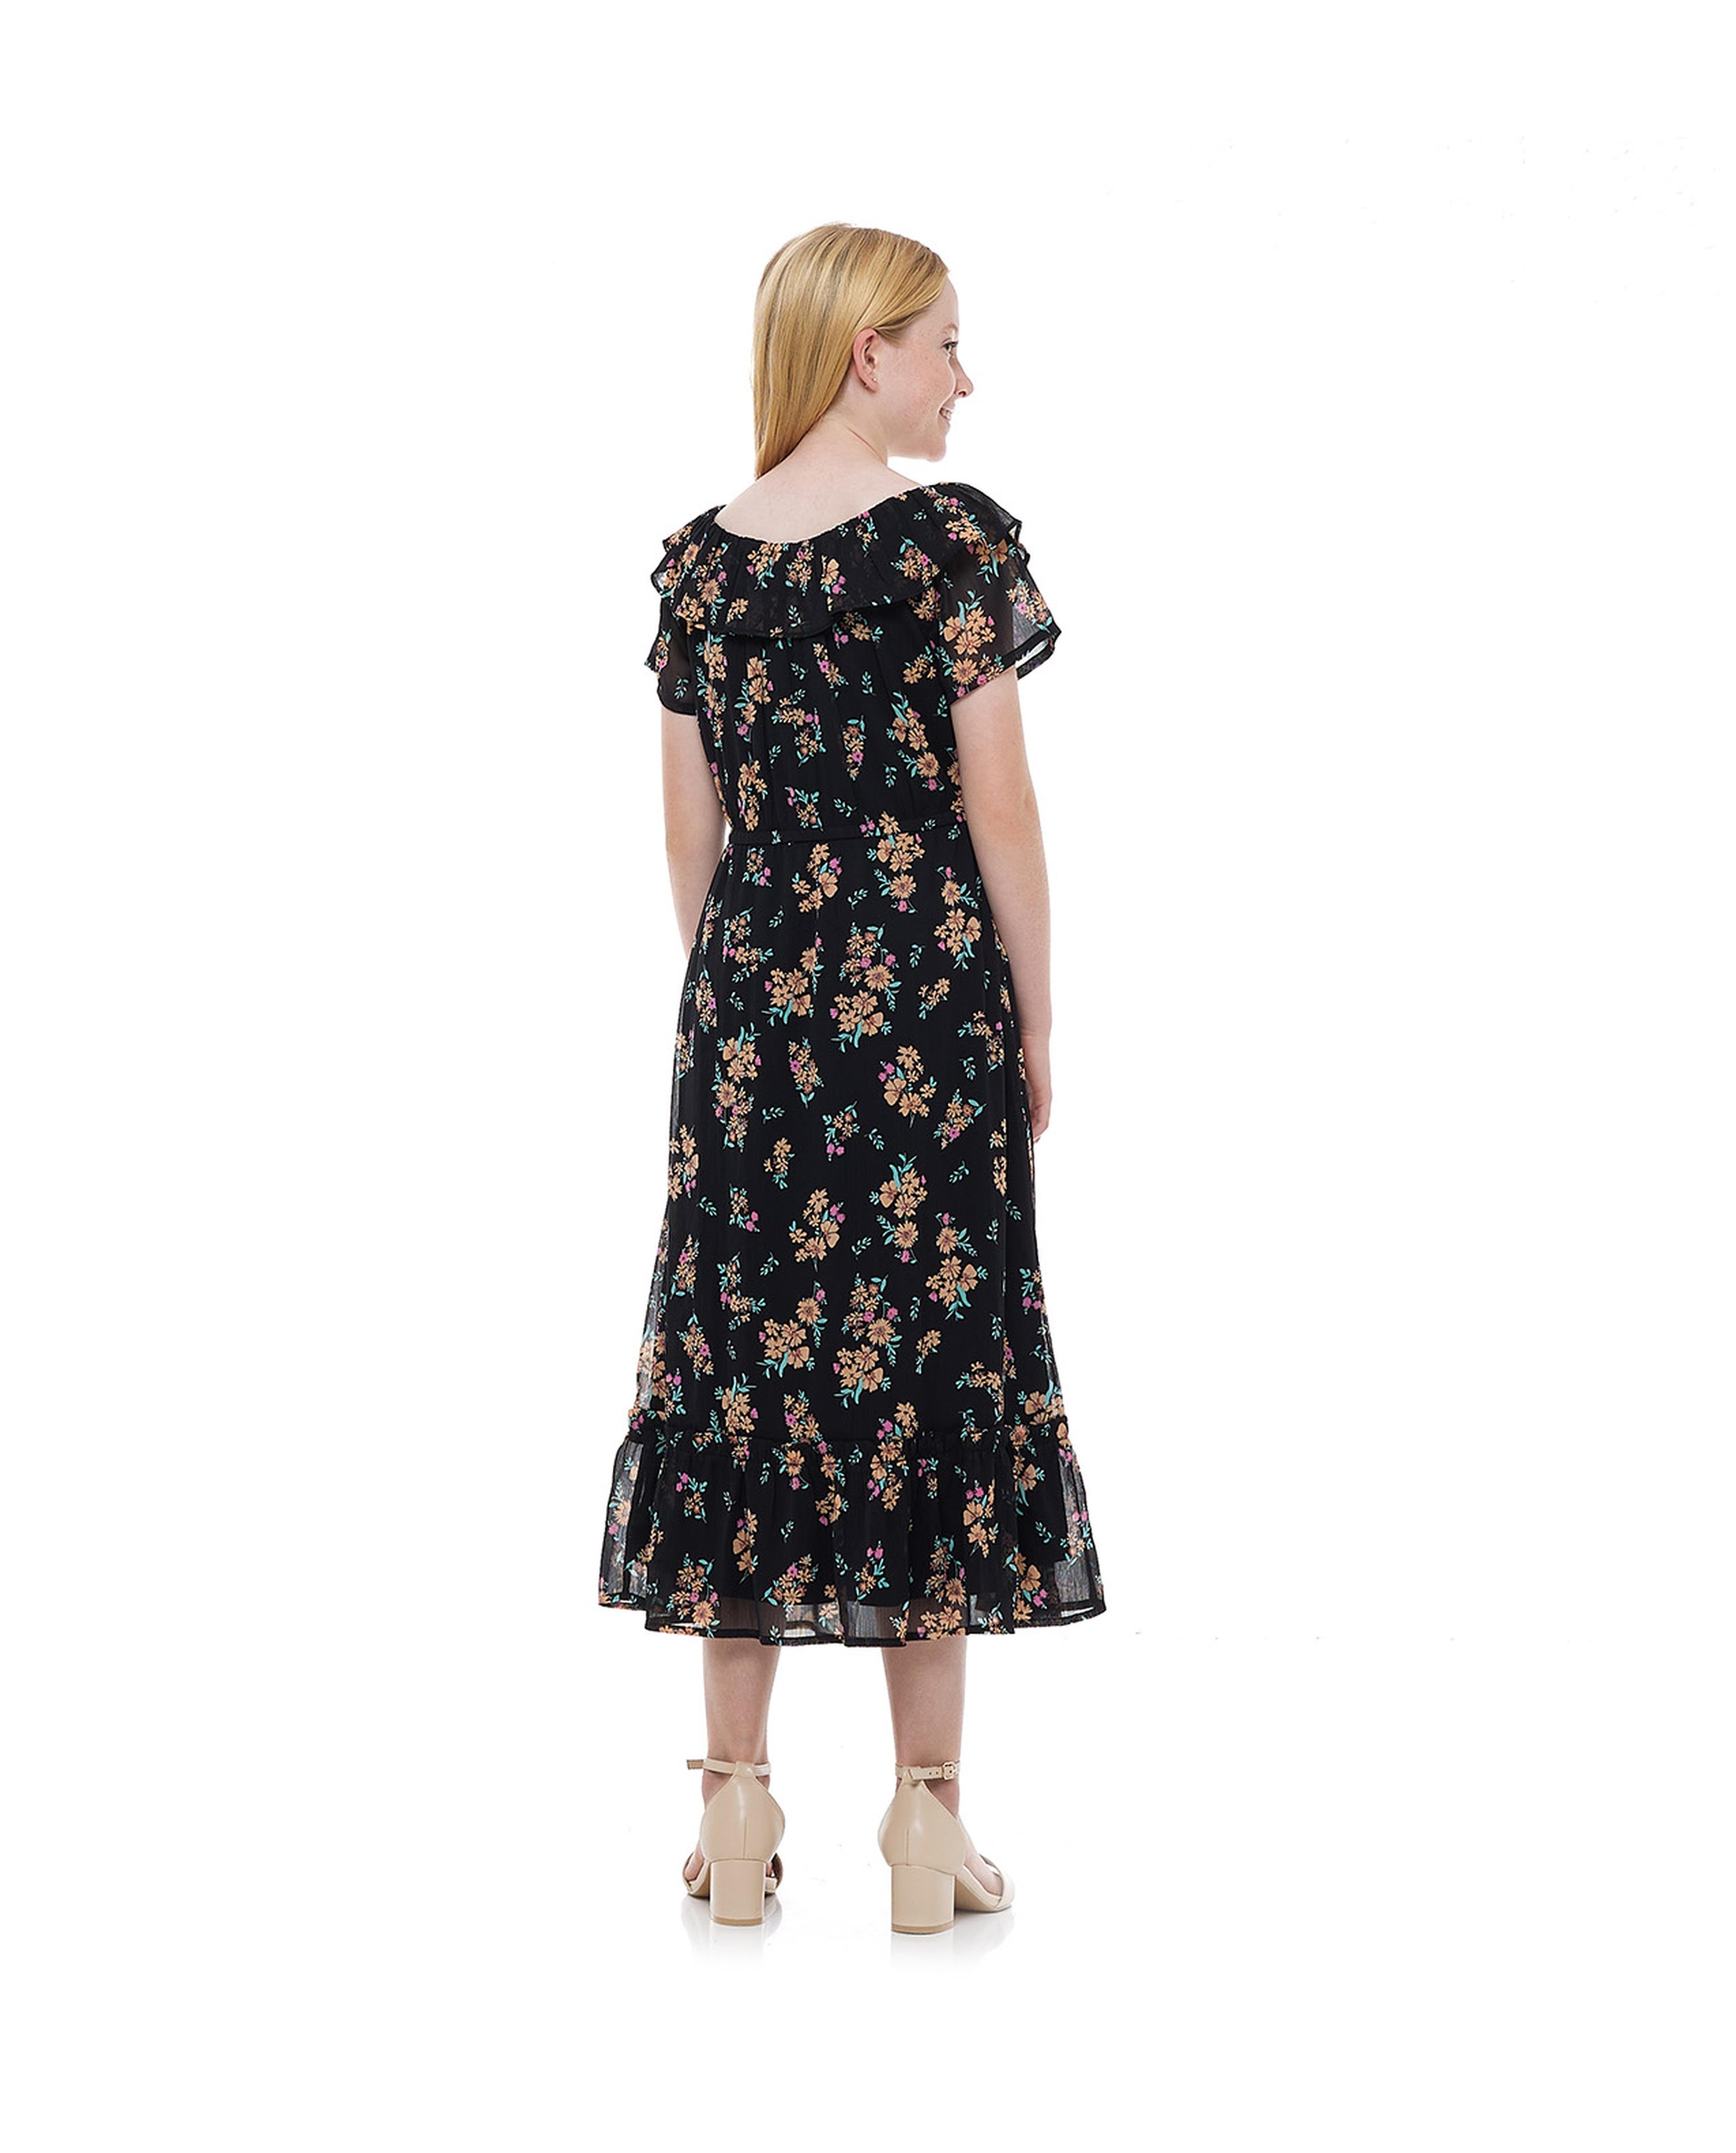 Floral Print Midi Dress with Round Neck and Short Sleeves